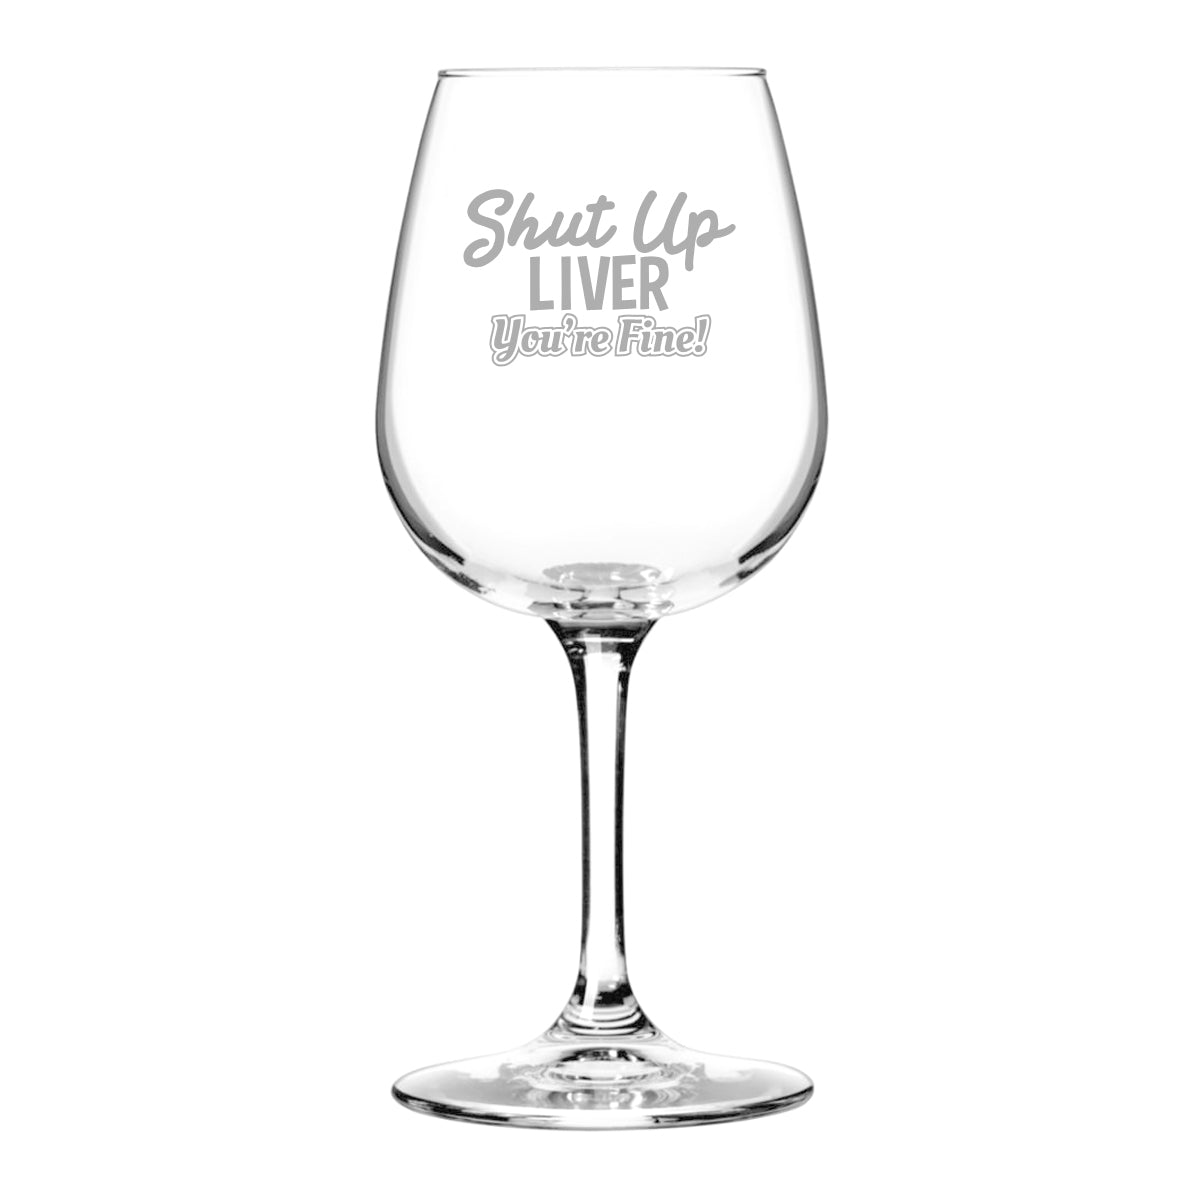 Shut Up Liver Youre Fine Engraved Stemless White Wine Glass